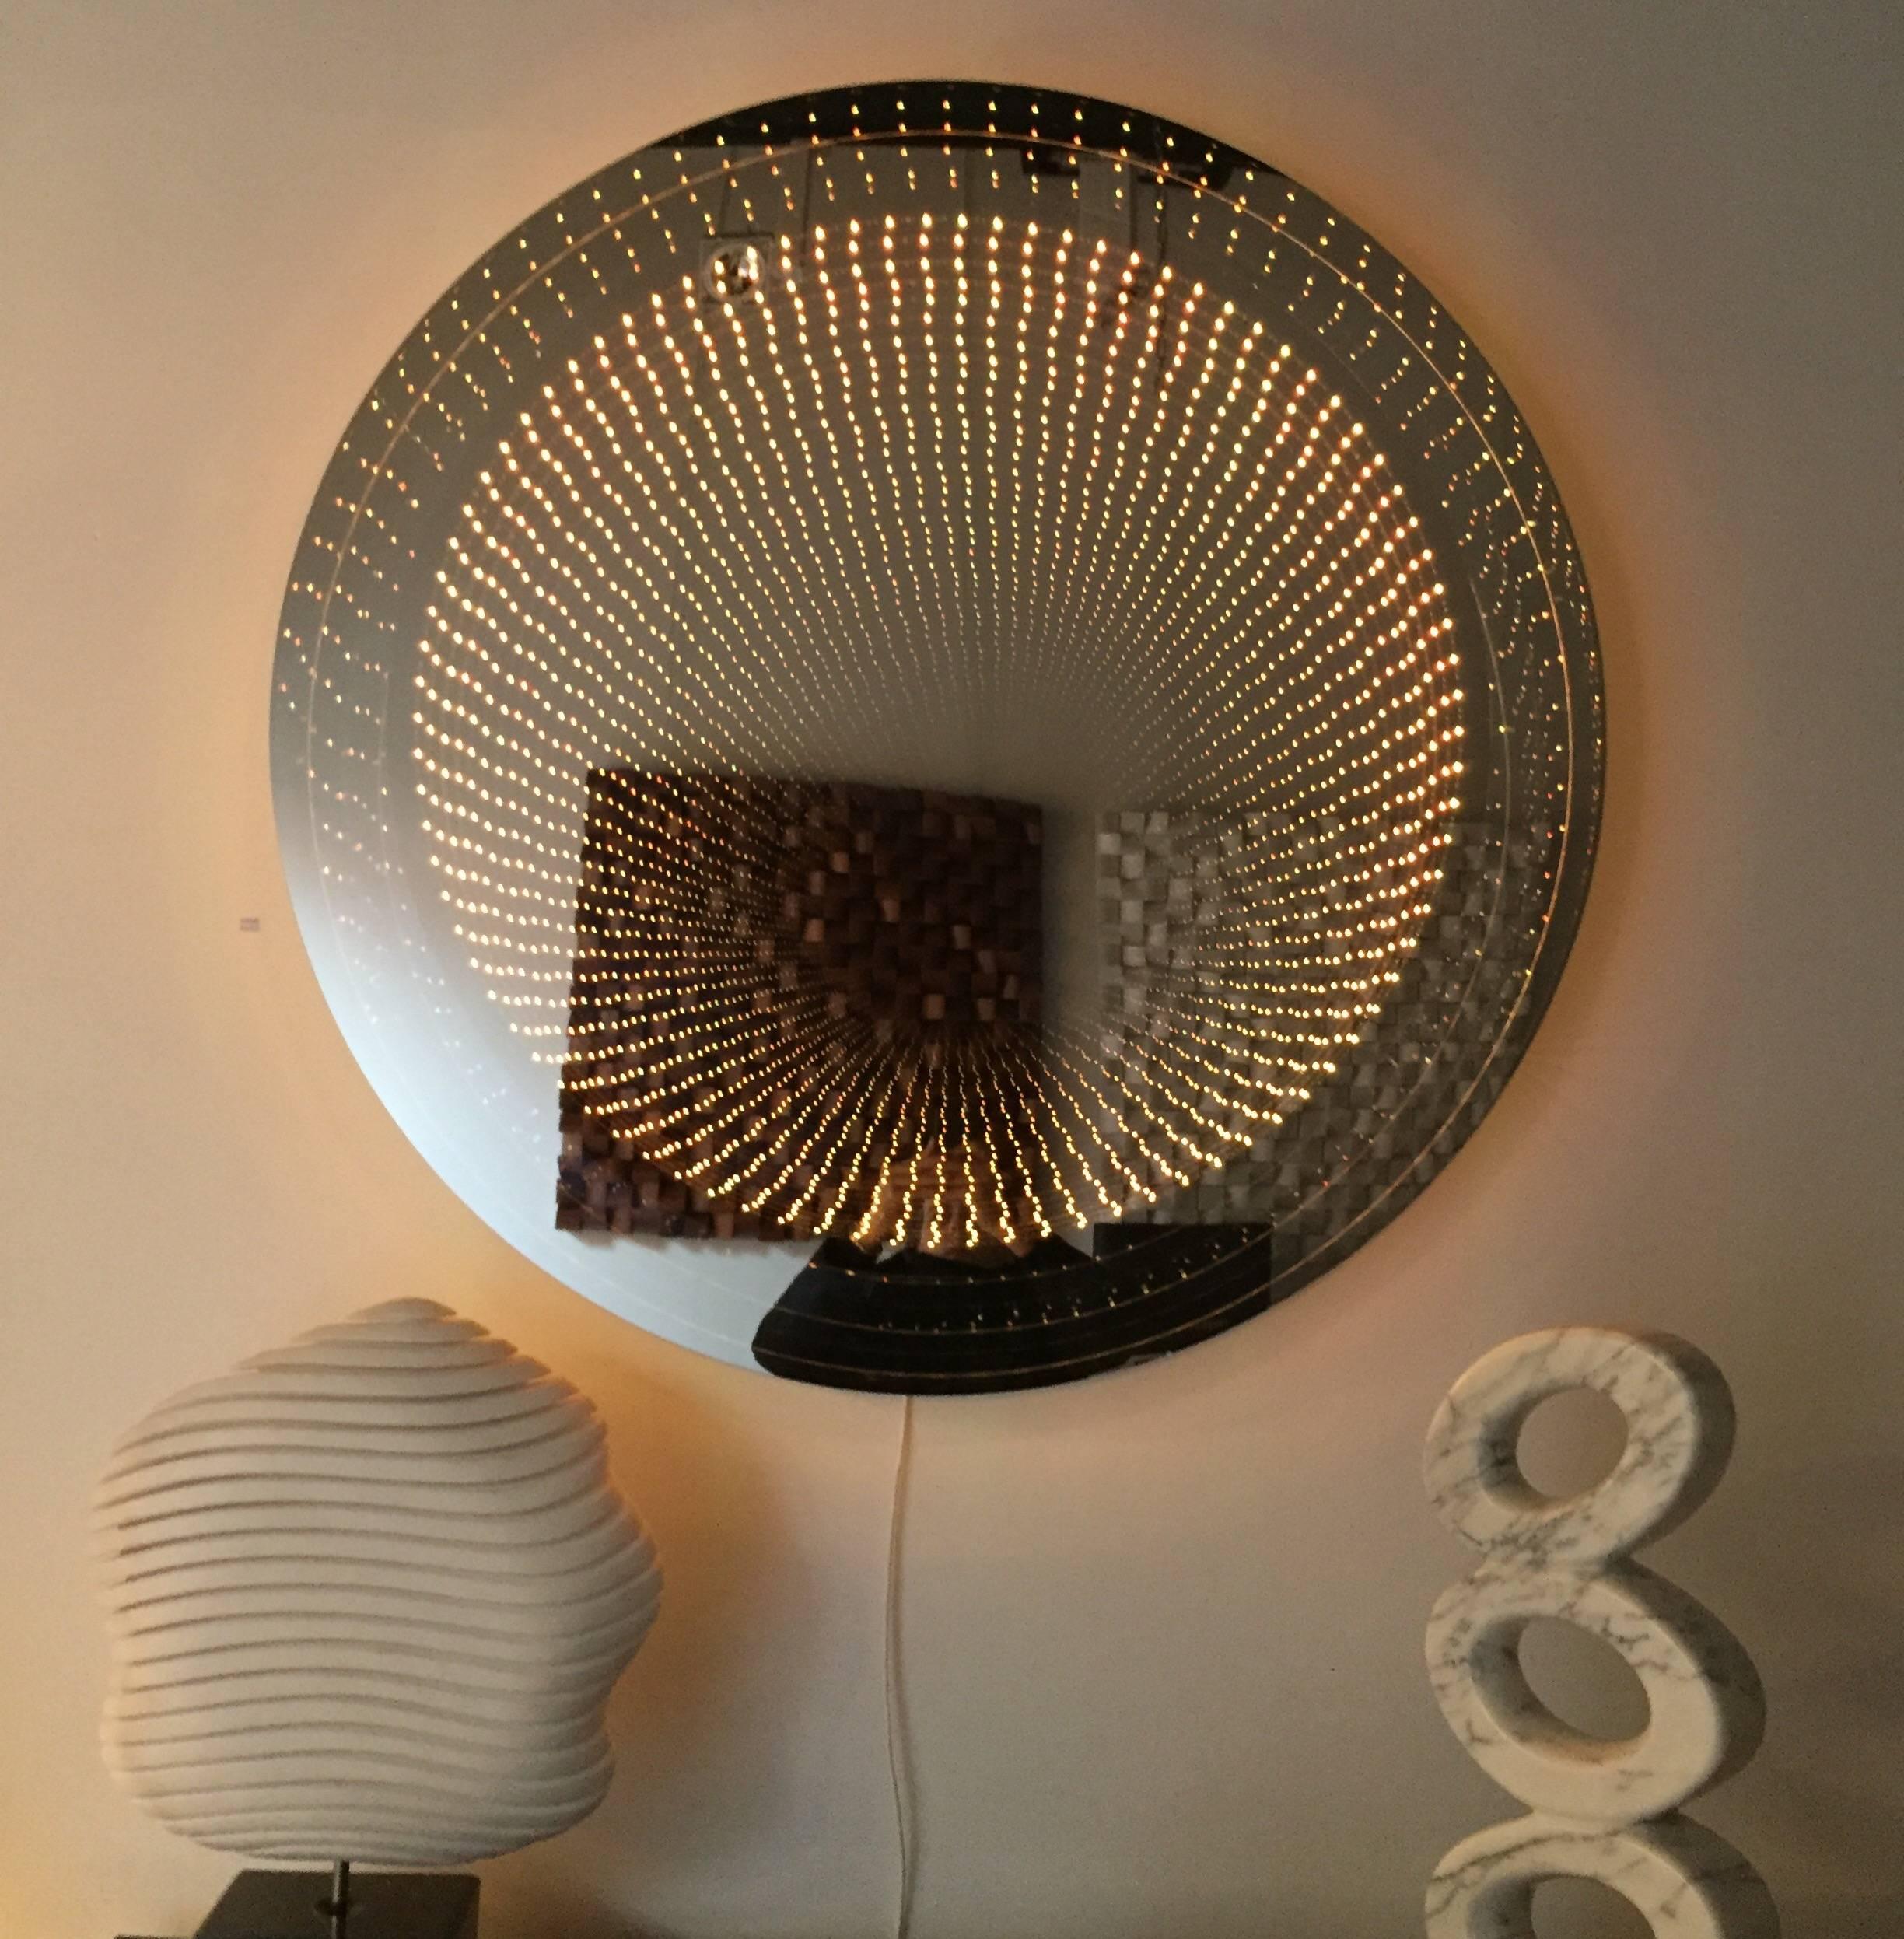 Raphael Fenice infinity mirror in Lucite and led technology
When the mirror is off looks like a real mirror.
Mirror can be controlled by a remote to switch on/off and change color
Wired for US and  European use.
Hand signed on the back by the